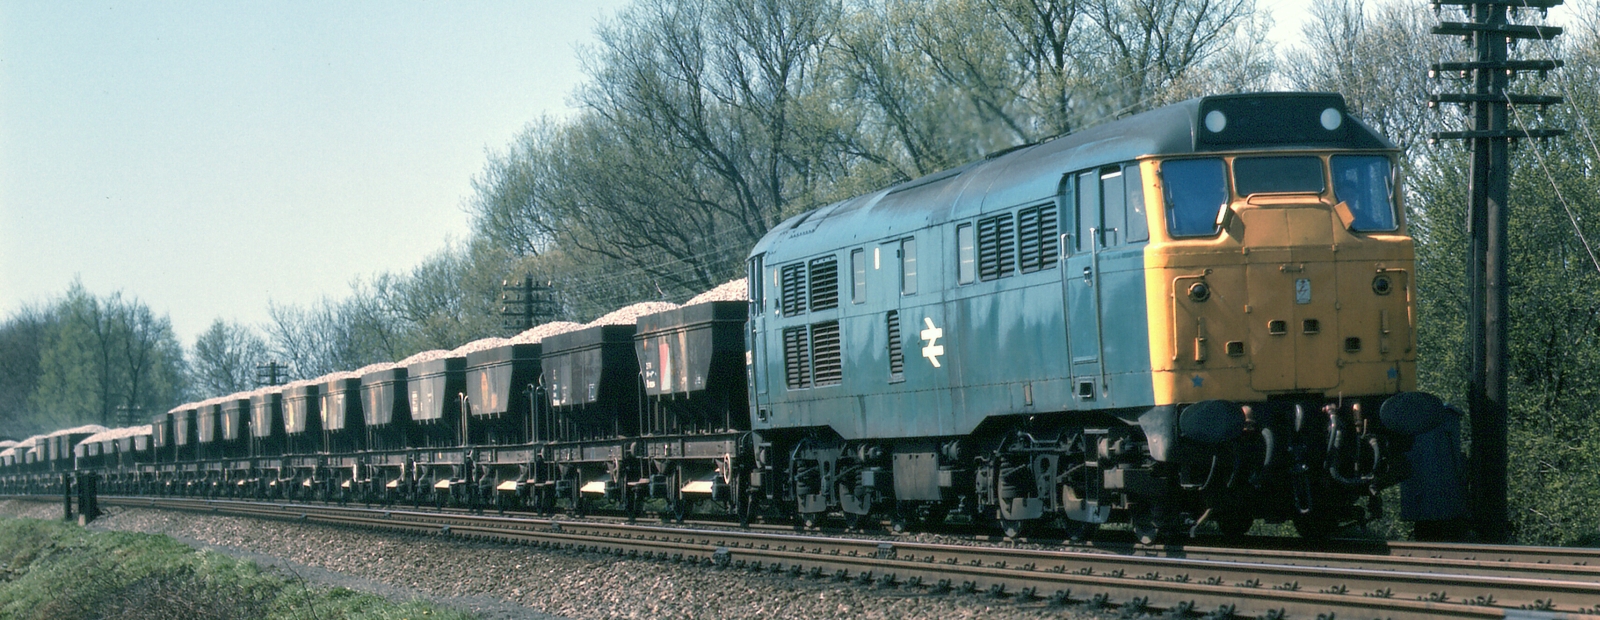 31205 in 1976 with a gravel train in Leicestershire